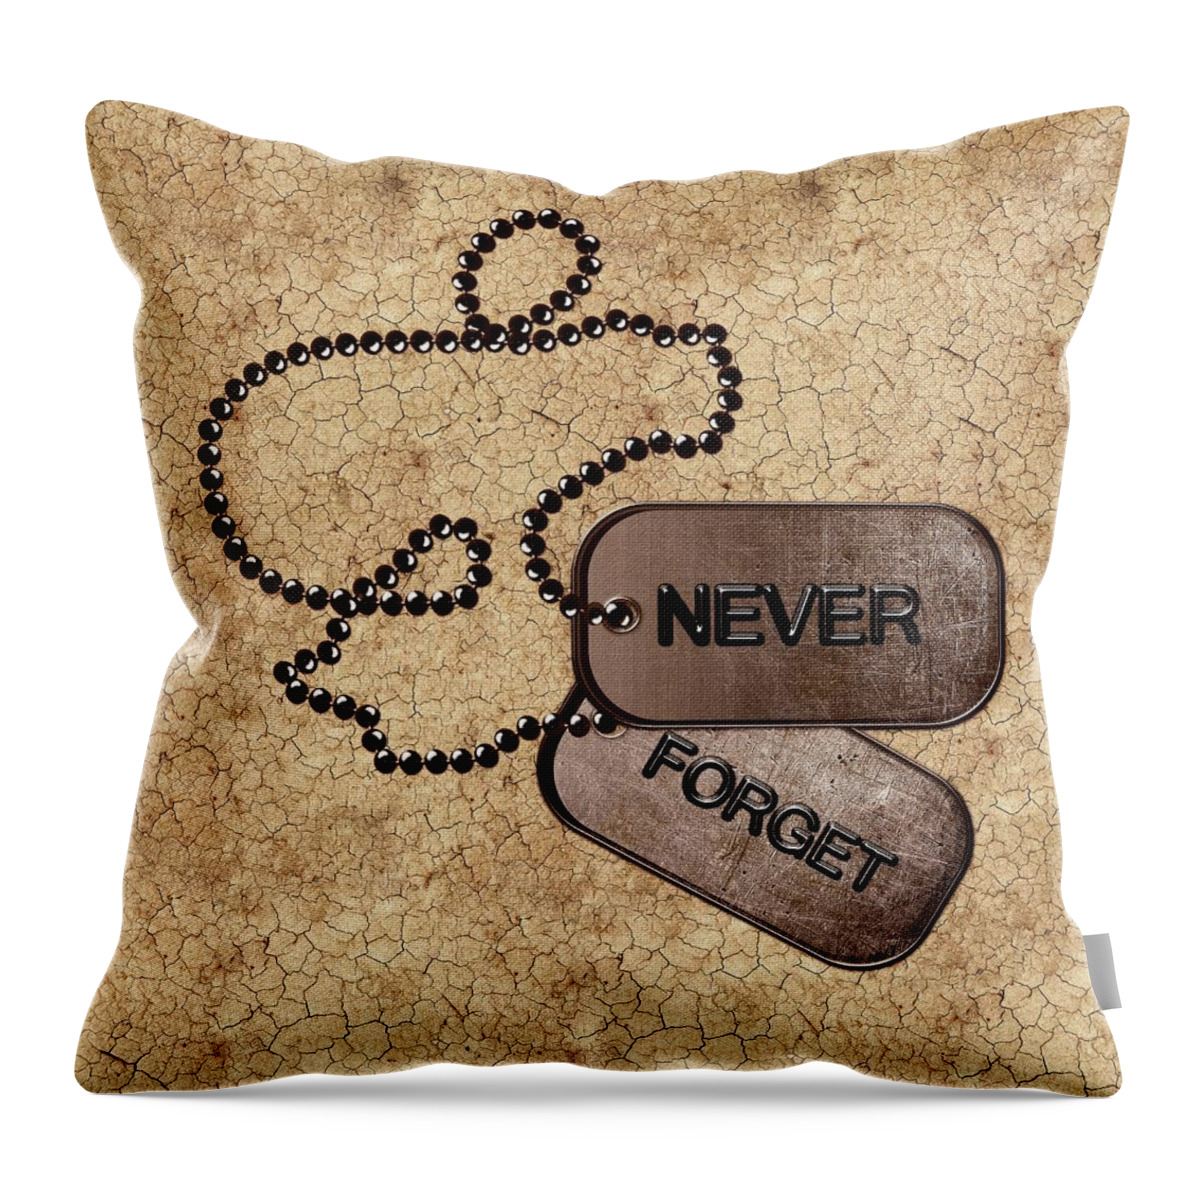 Never Throw Pillow featuring the digital art Never Forget by Anastasiya Malakhova